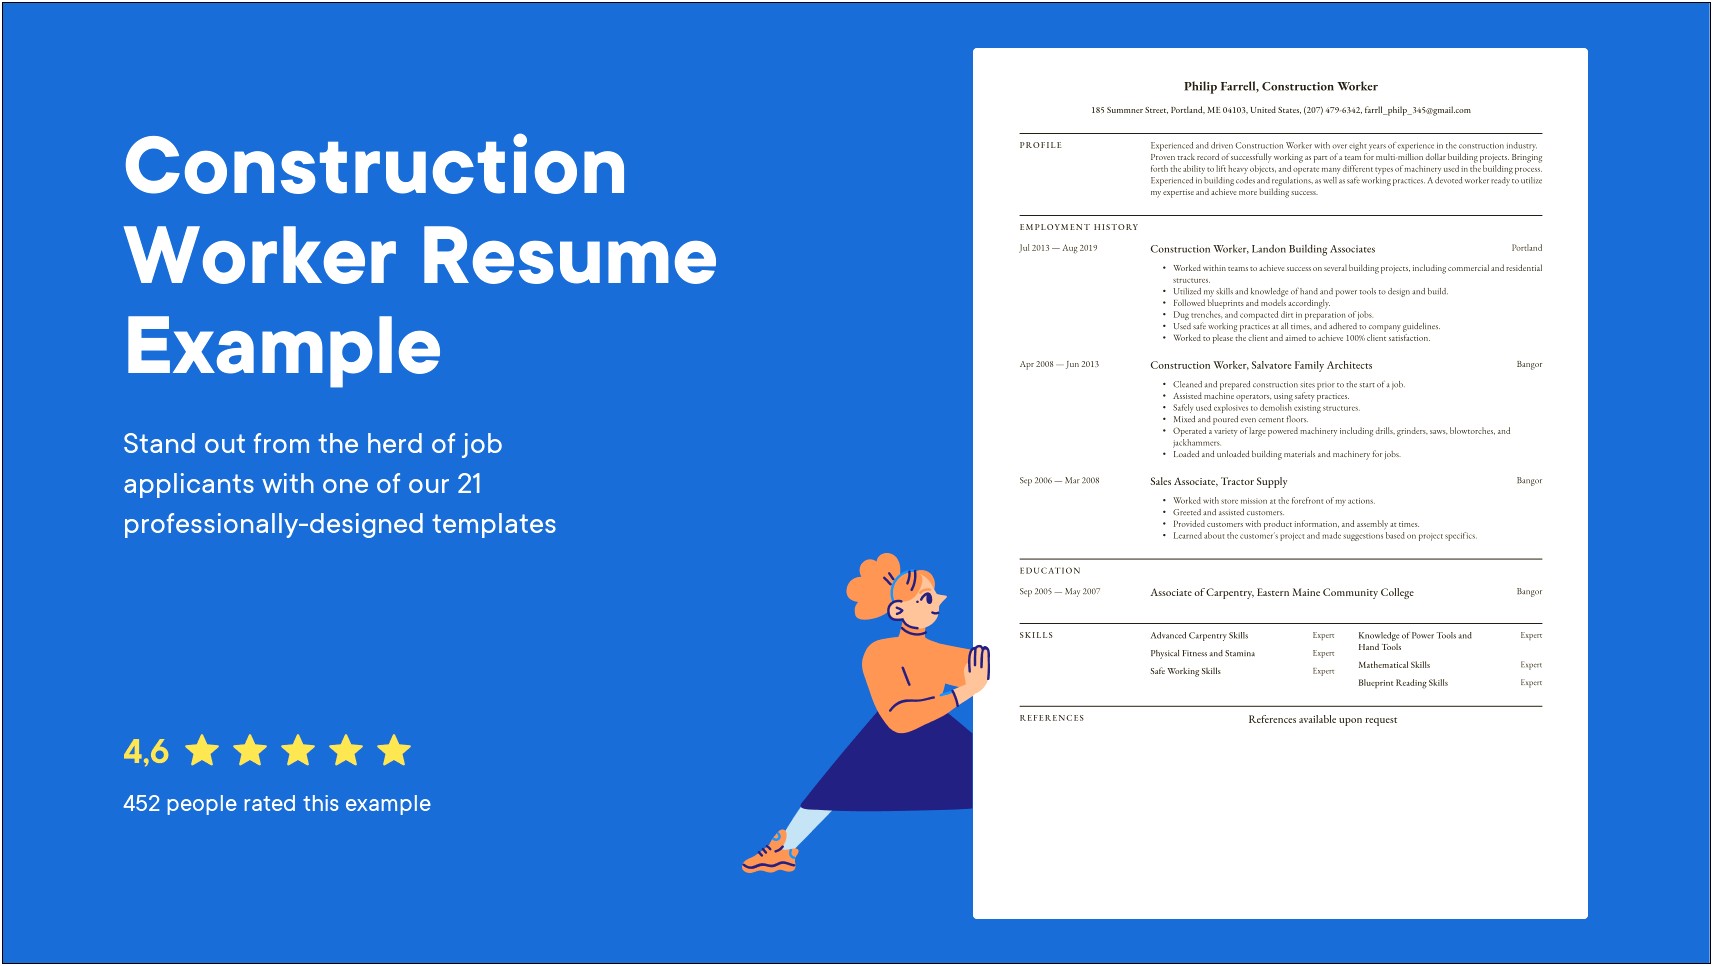 Resume Objective Sample For Construction Worker